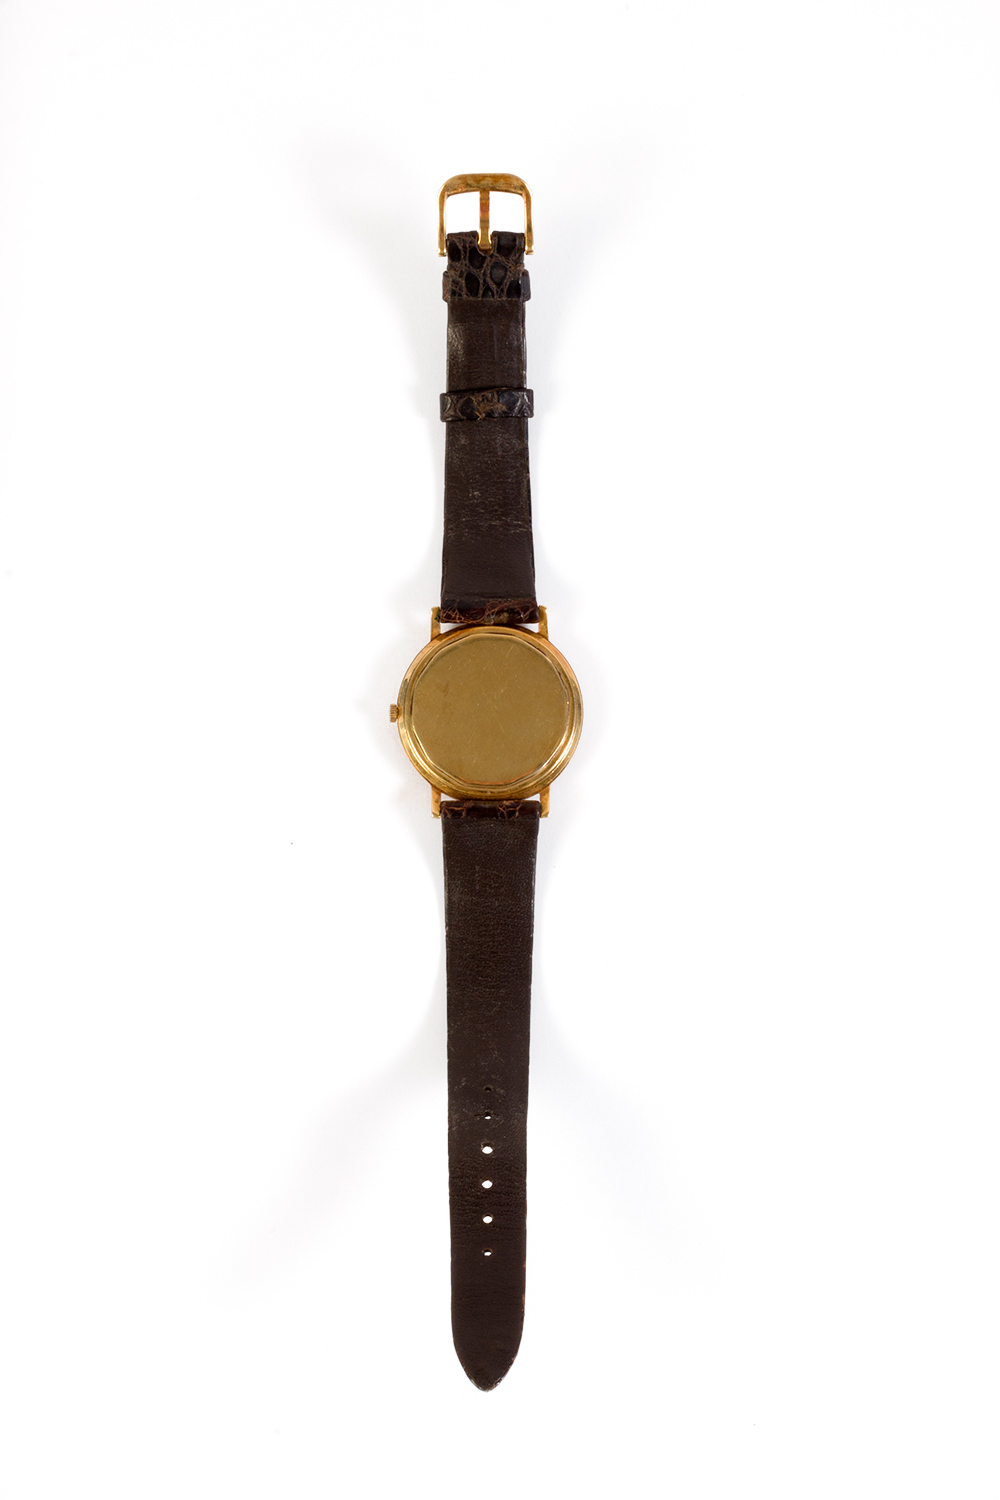 Audemars Piguet wristwatch, Gübelin model, in gold and leather strap. Automatic movement. - Image 3 of 6